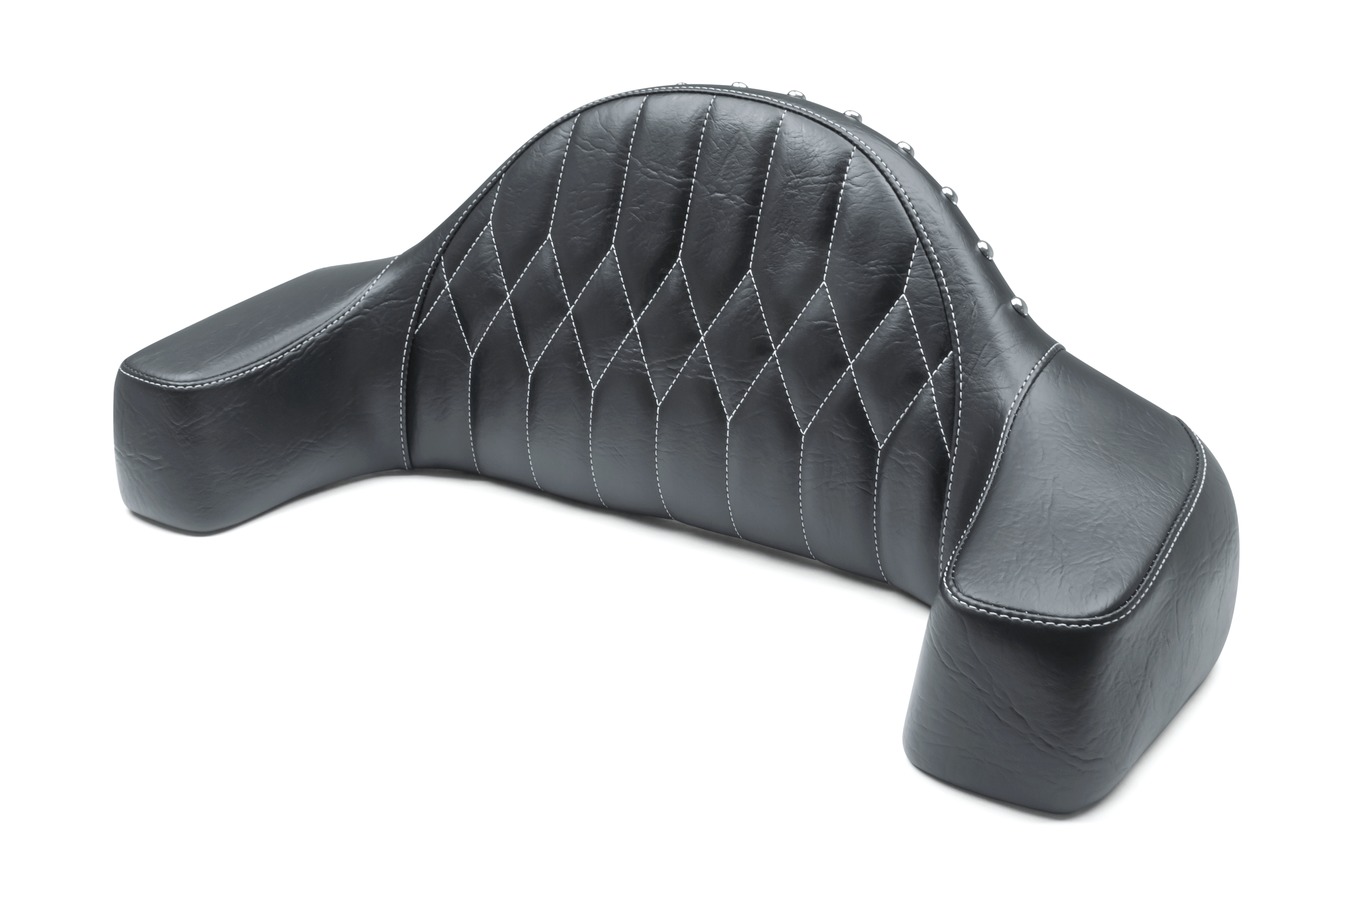 Standard Touring Passenger Backrest for Indian Chieftain, Chief Classic, Dark Horse, Roadmaster, Springfield & Vintage 2014-